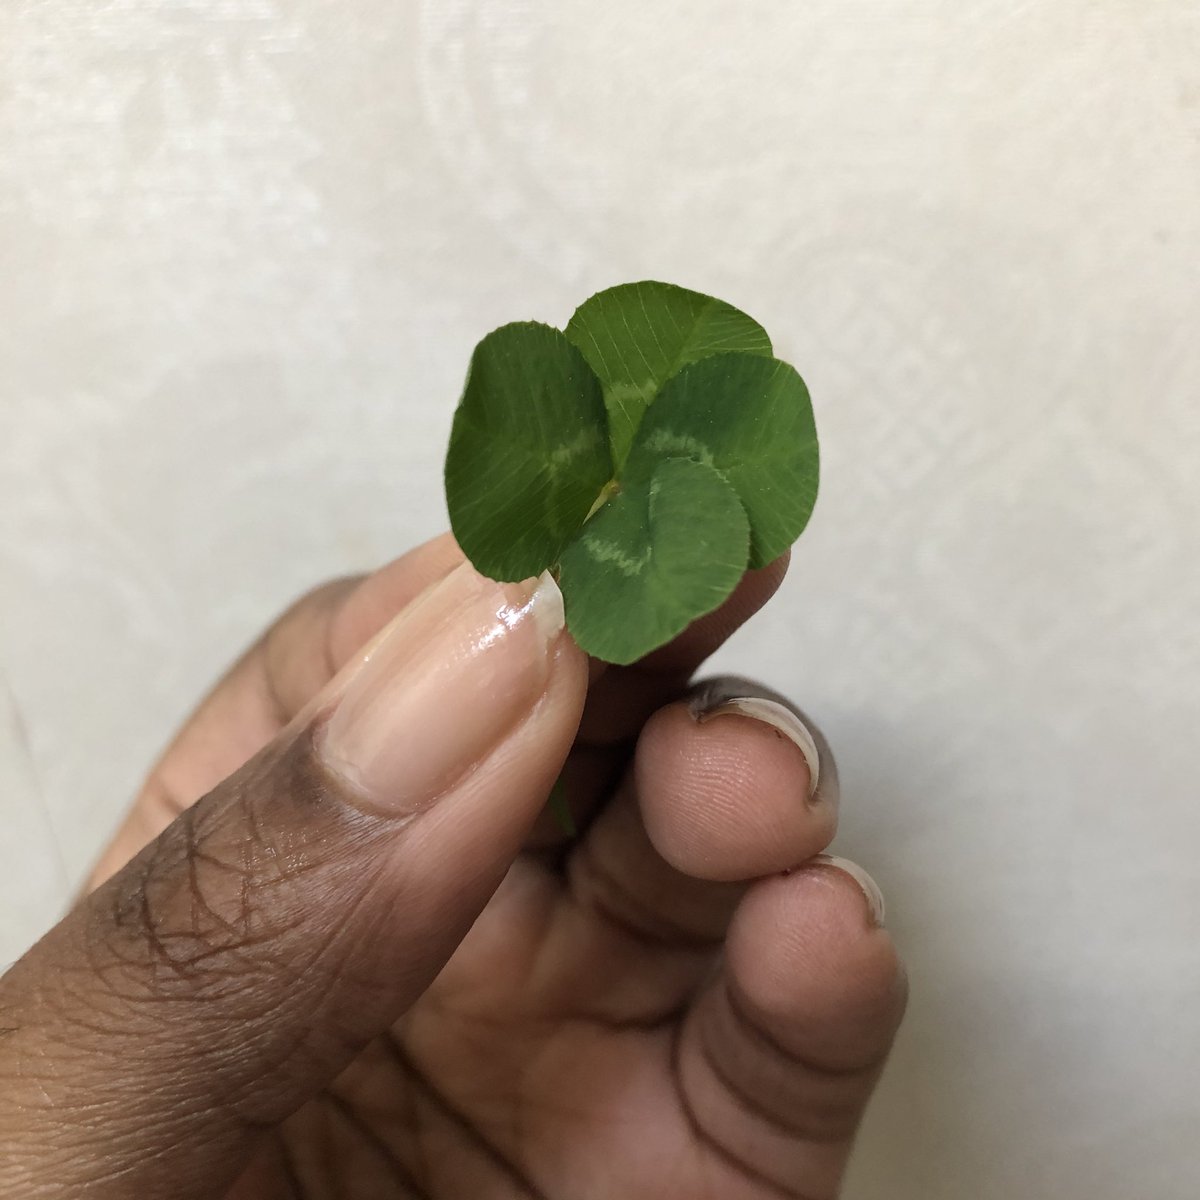 Day 4 of hunting for four leaf clovers